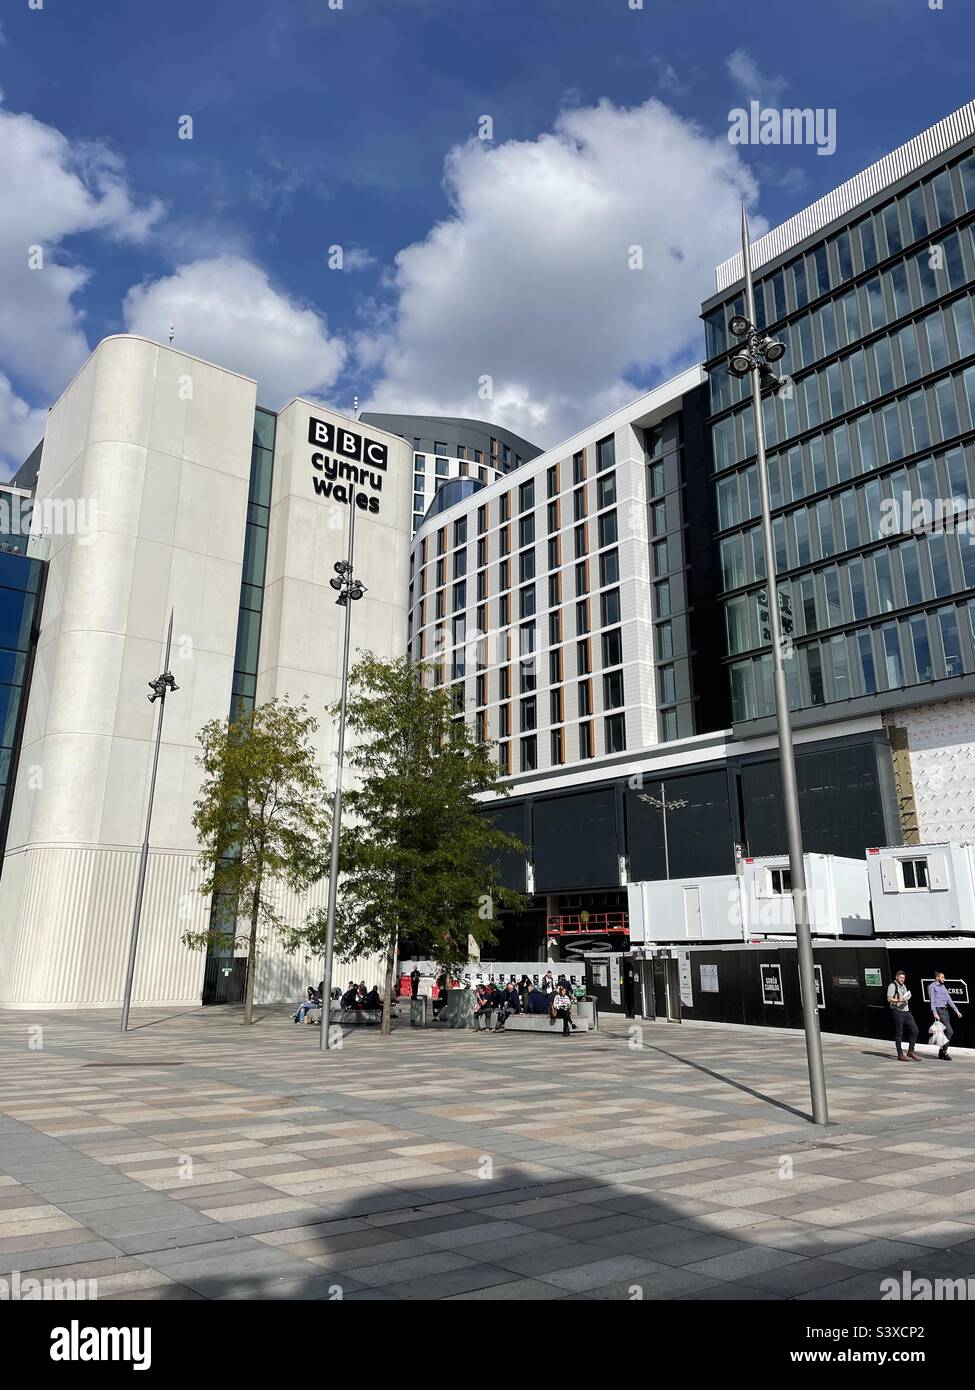 BBC Wales building, Central Square,Cardiff Stock Photo